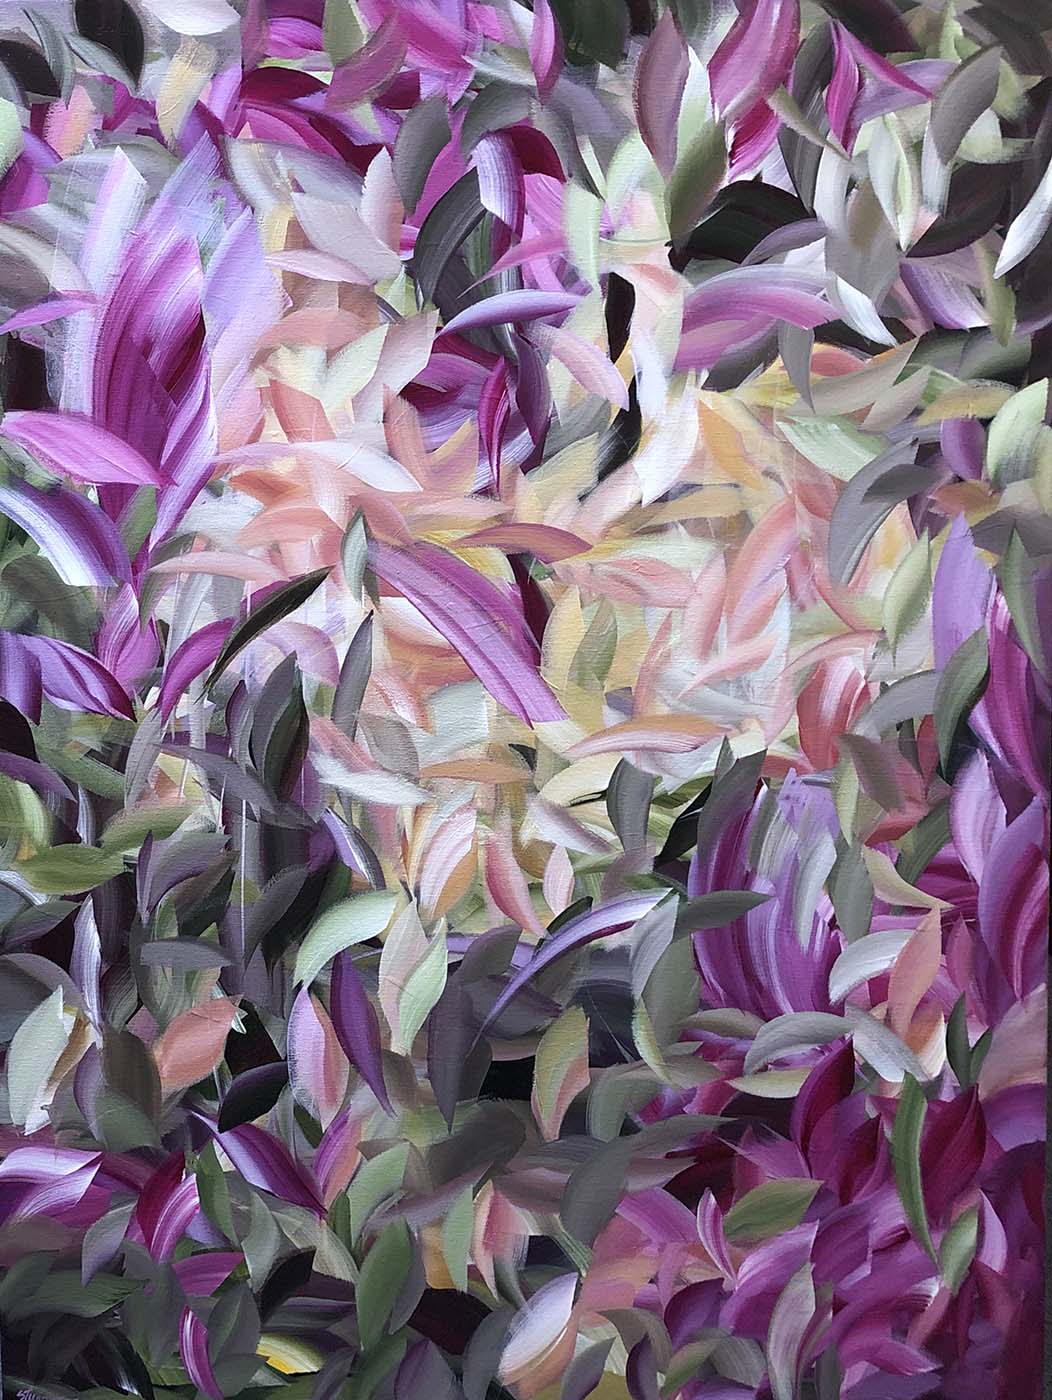 Contemporary art. Title: Garden Delight, 40 x 30 in, Acrylic on Canvas by Canadian artist Shirley Thompson.